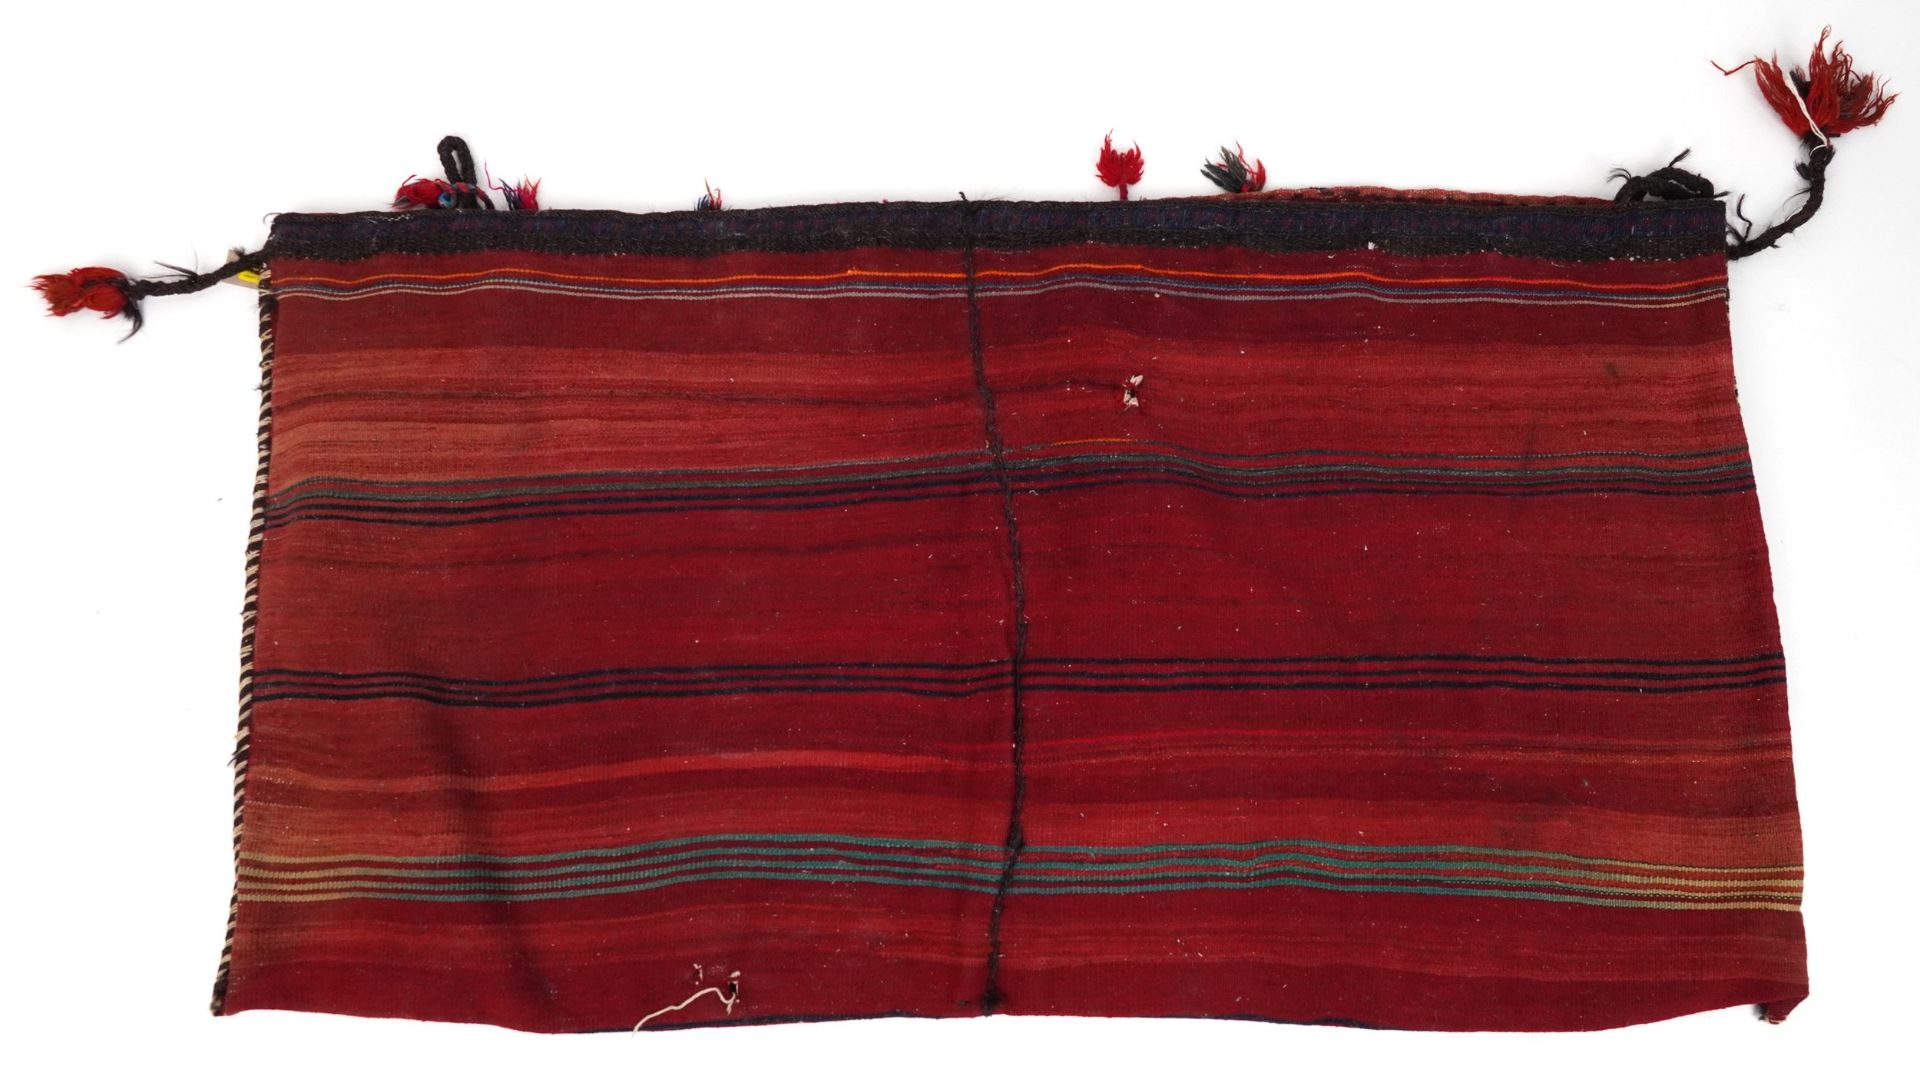 Rectangular Afghan red ground saddle bag having an allover repeat design, 150cm x 80cm : For further - Image 7 of 7